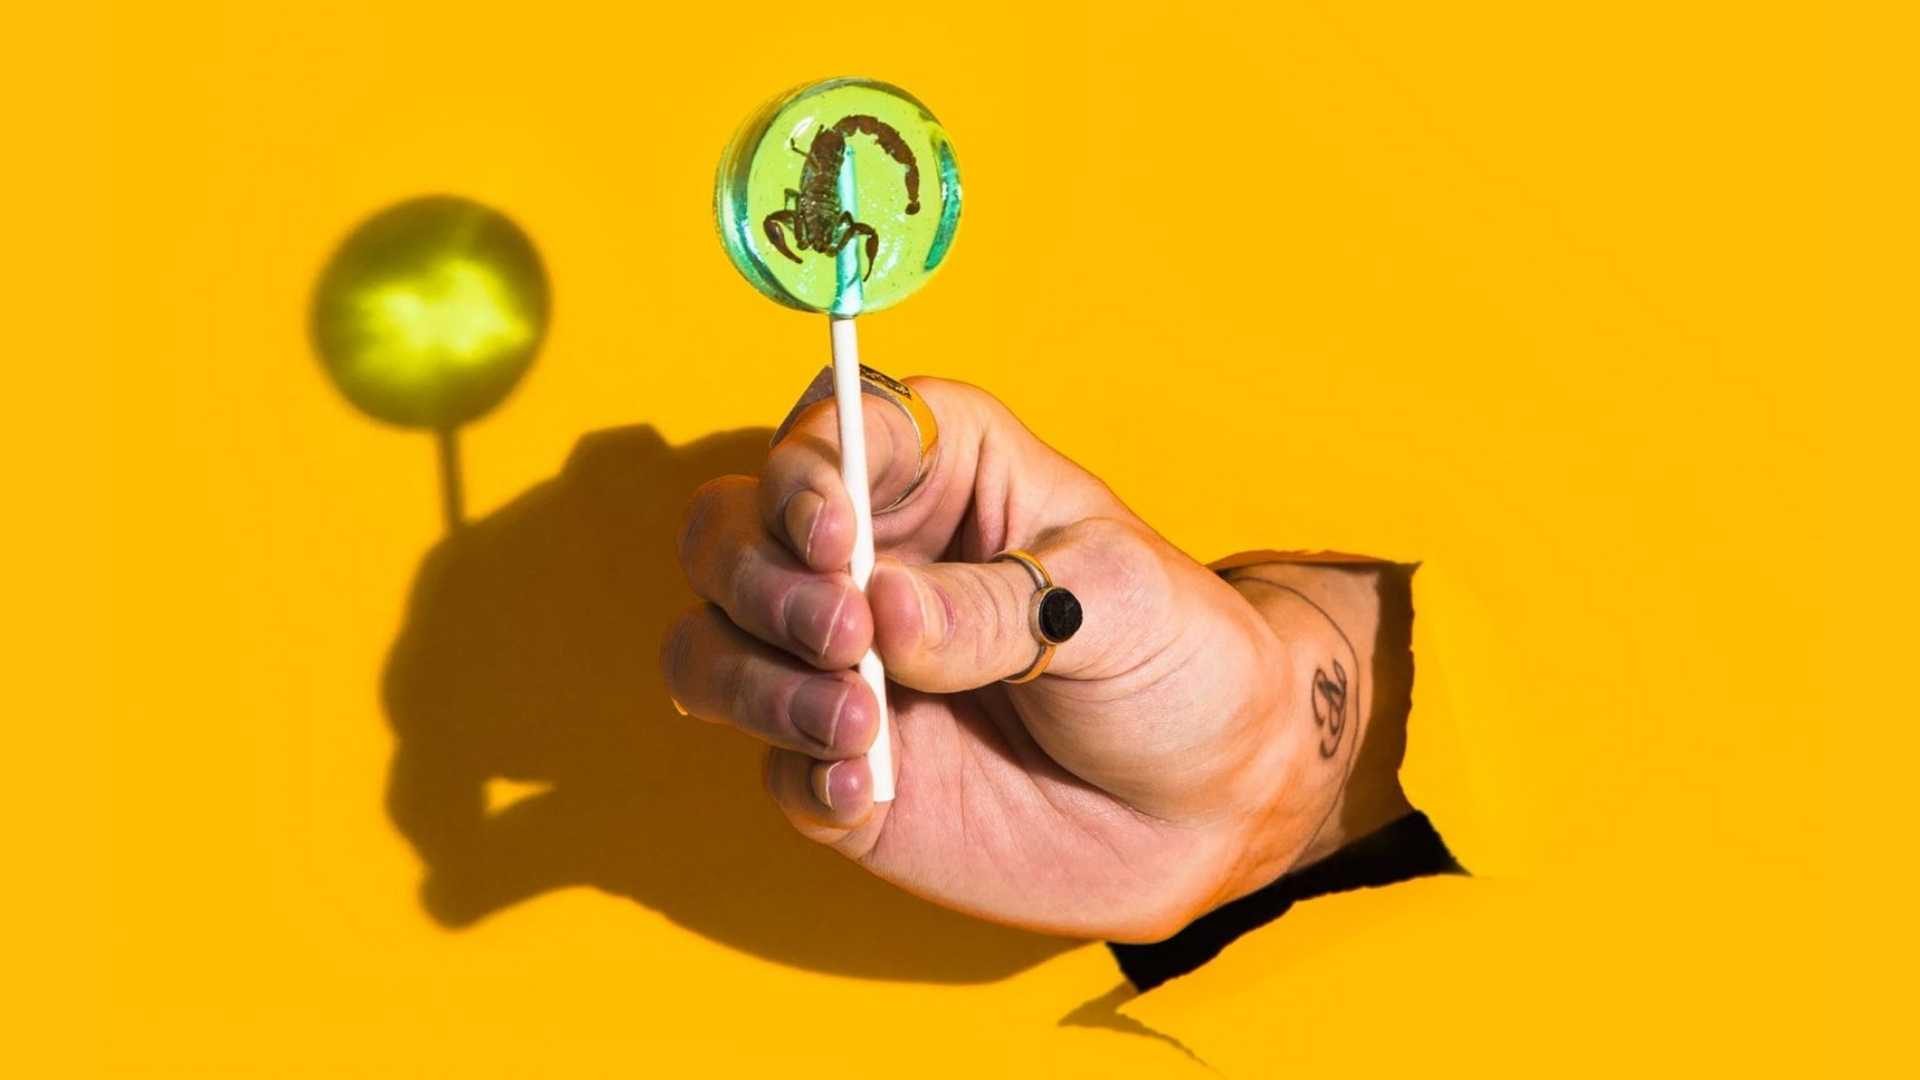 A hand pops out of a bright yellow background holding a lollipop with a scorpion inside